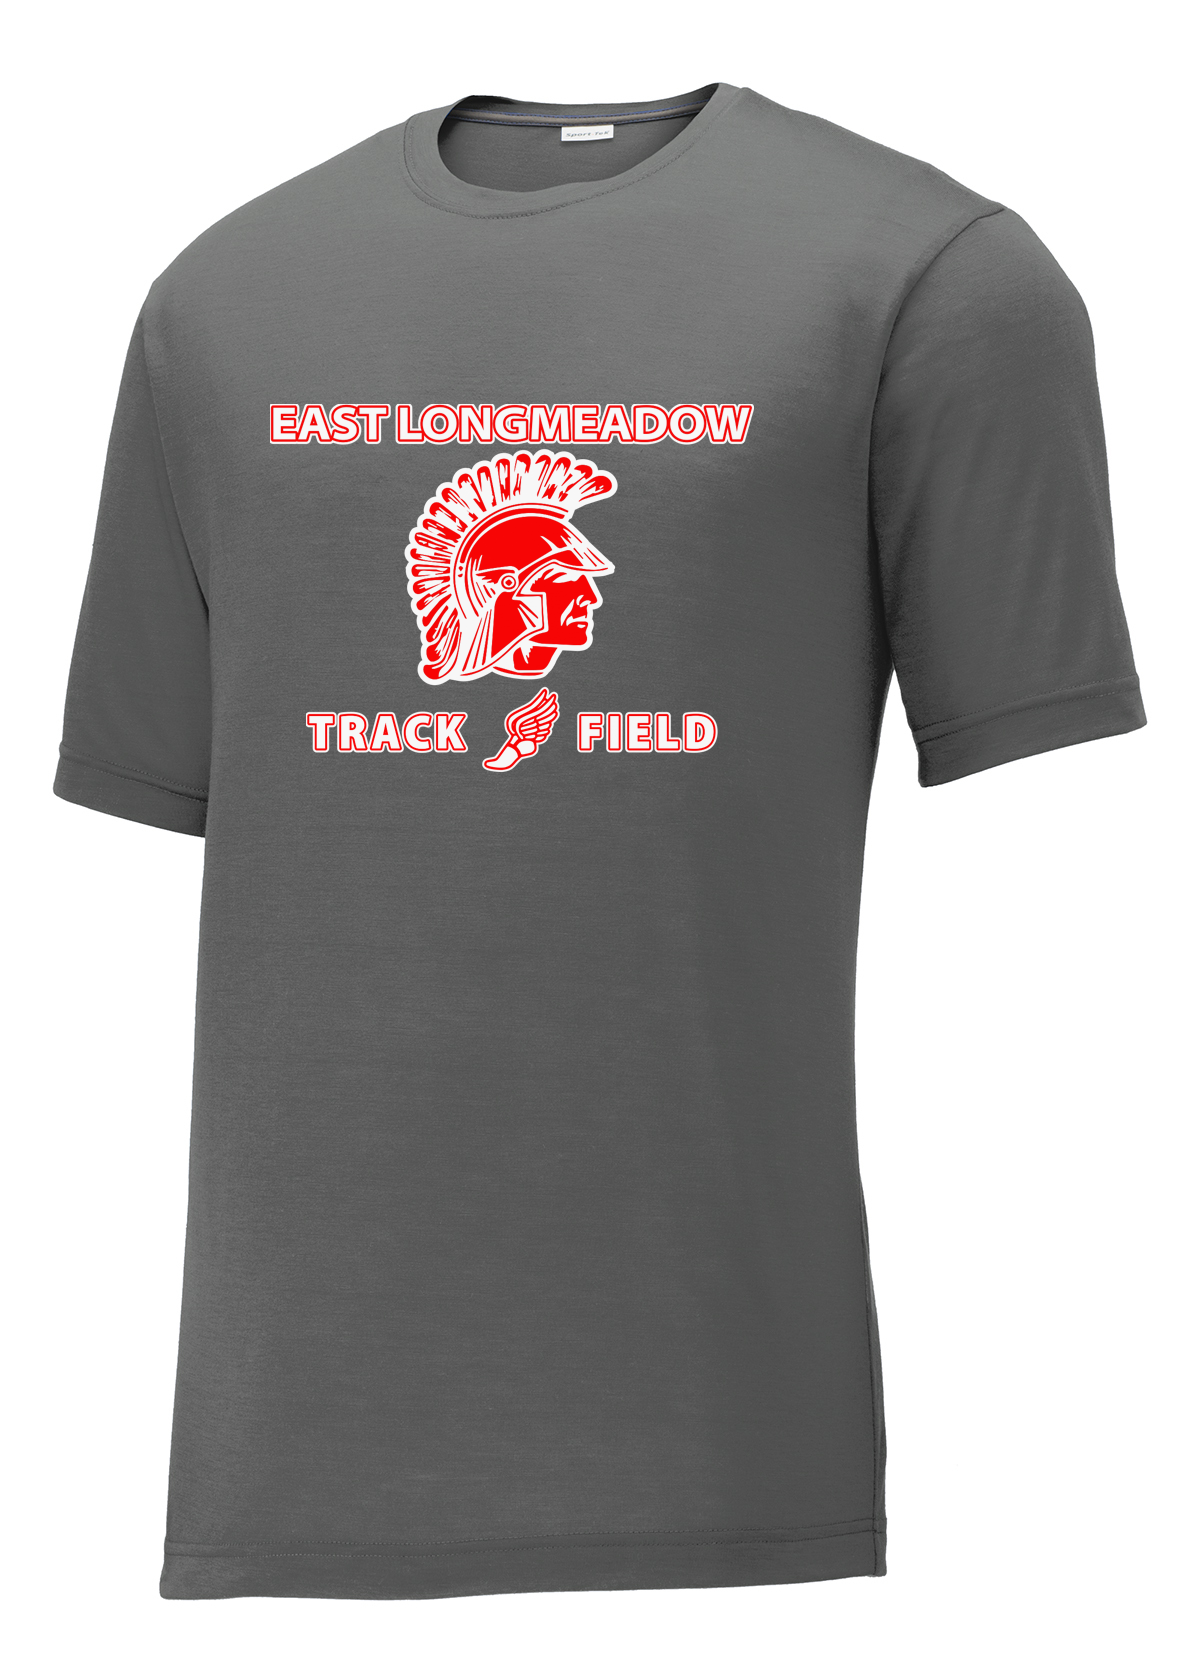 East Longmeadow Track and Field Smoke Grey CottonTouch Performance T-Shirt